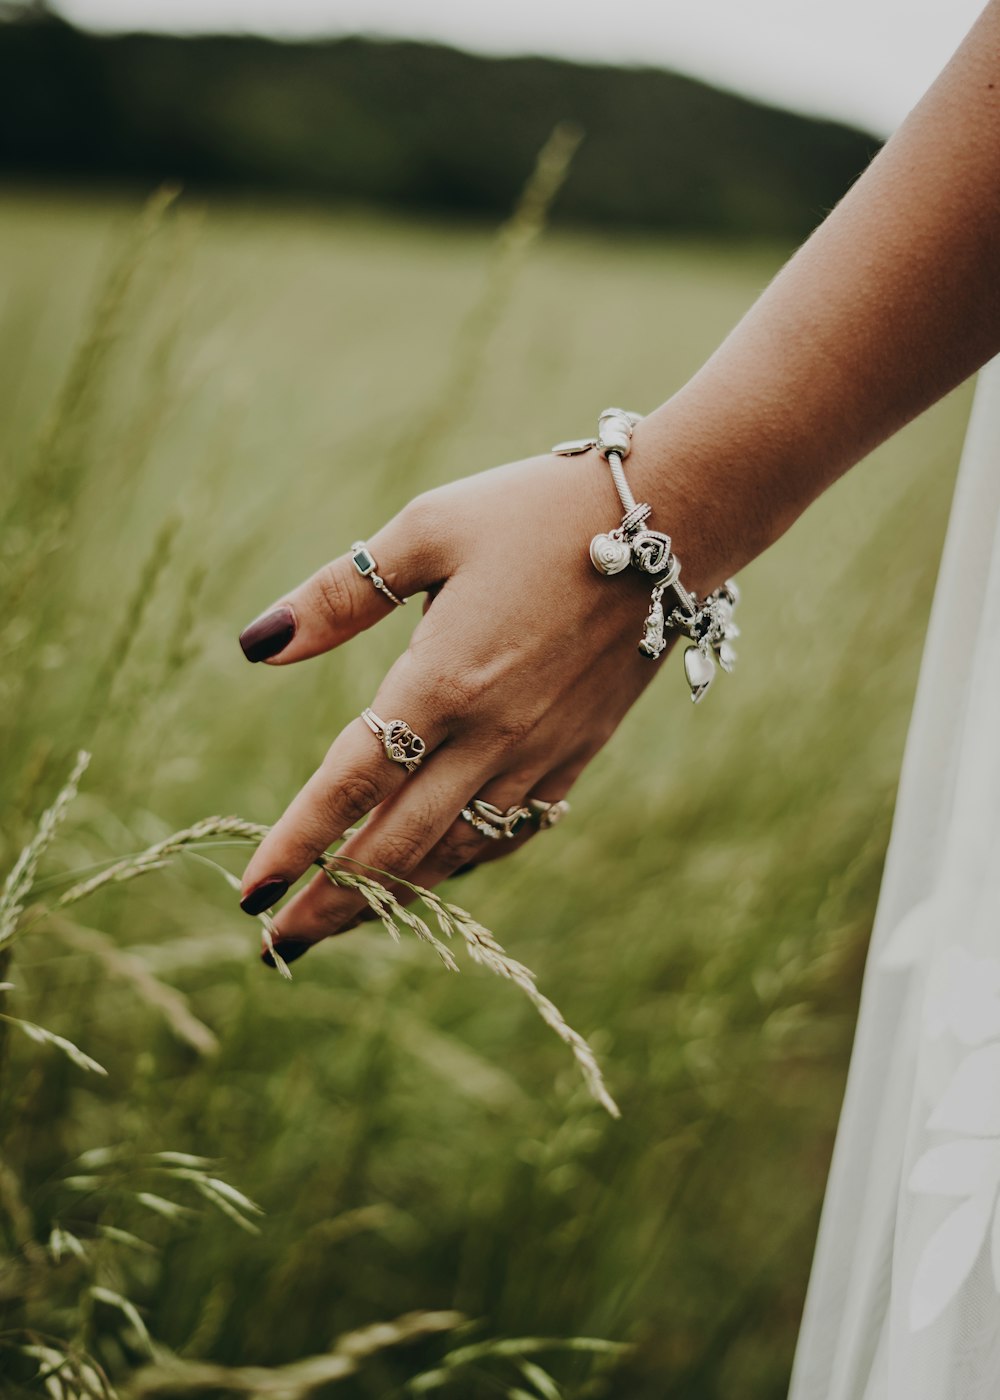 a woman's hand in a field of tall grass